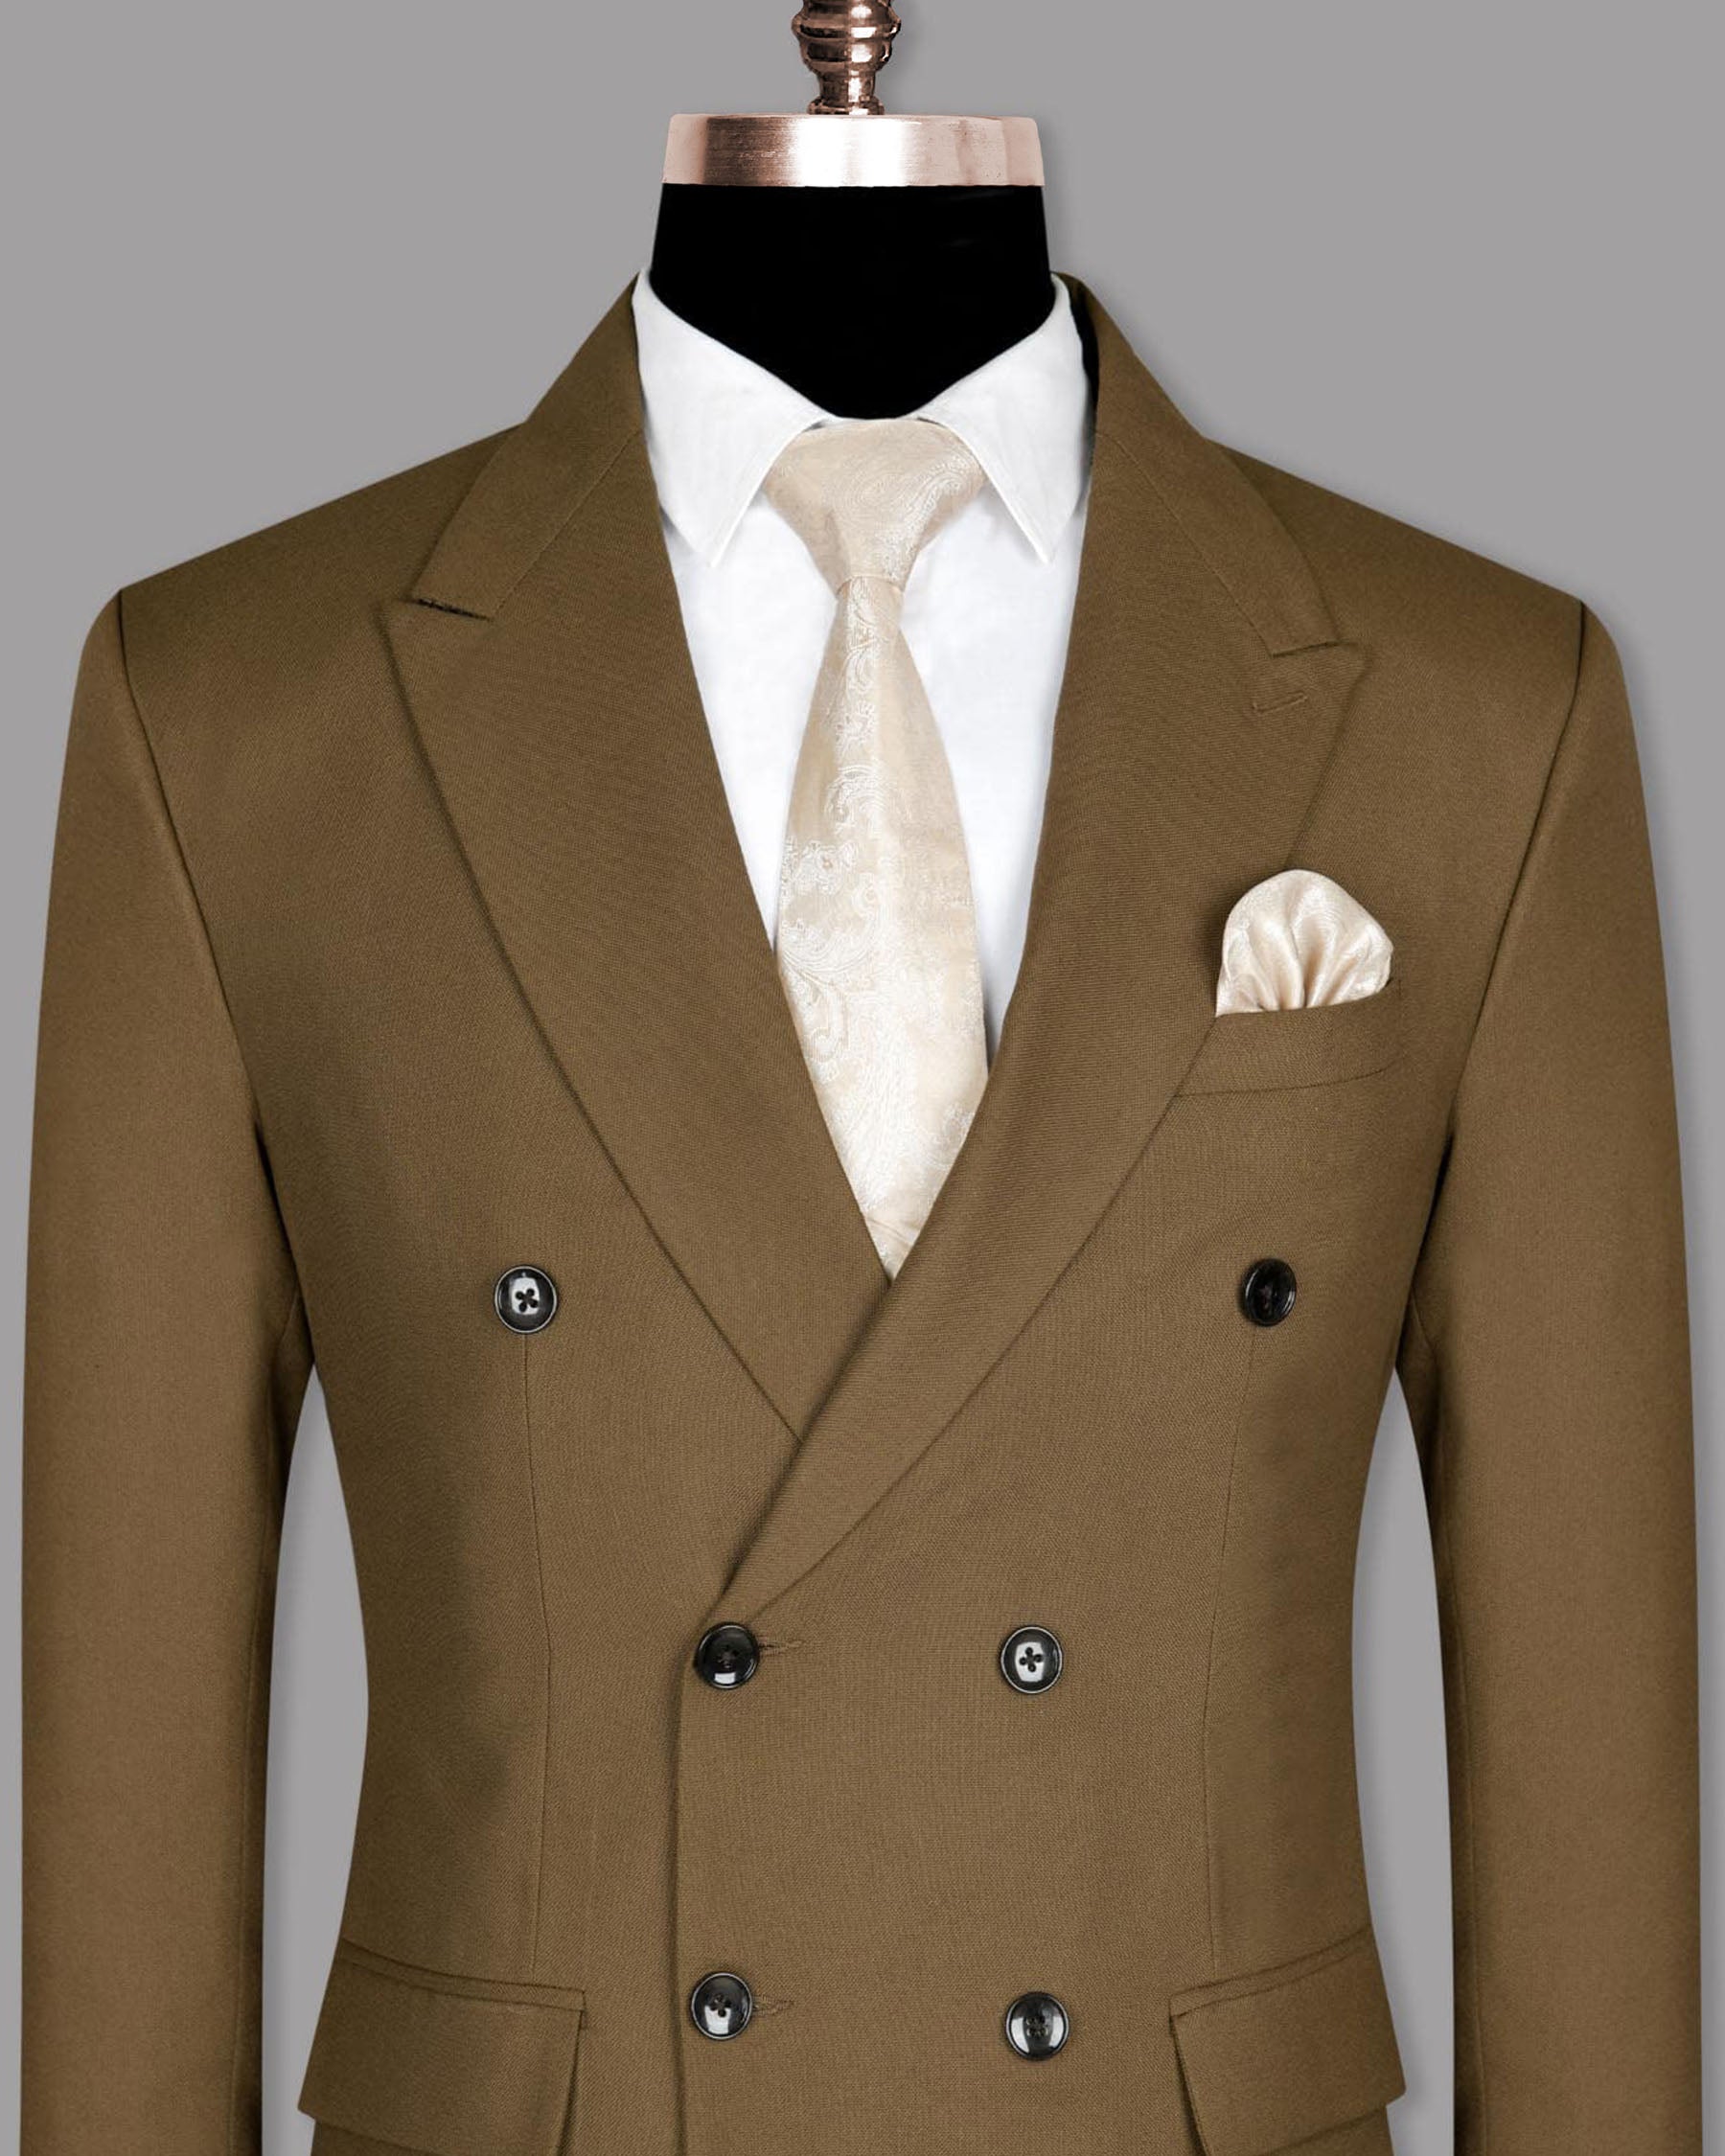 Soil Brown Wool Rich Double Breasted Blazer BL811DB-56, BL811DB-52, BL811DB-58, BL811DB-36, BL811DB-38, BL811DB-42, BL811DB-60, BL811DB-40, BL811DB-46, BL811DB-44, BL811DB-48, BL811DB-50, BL811DB-54